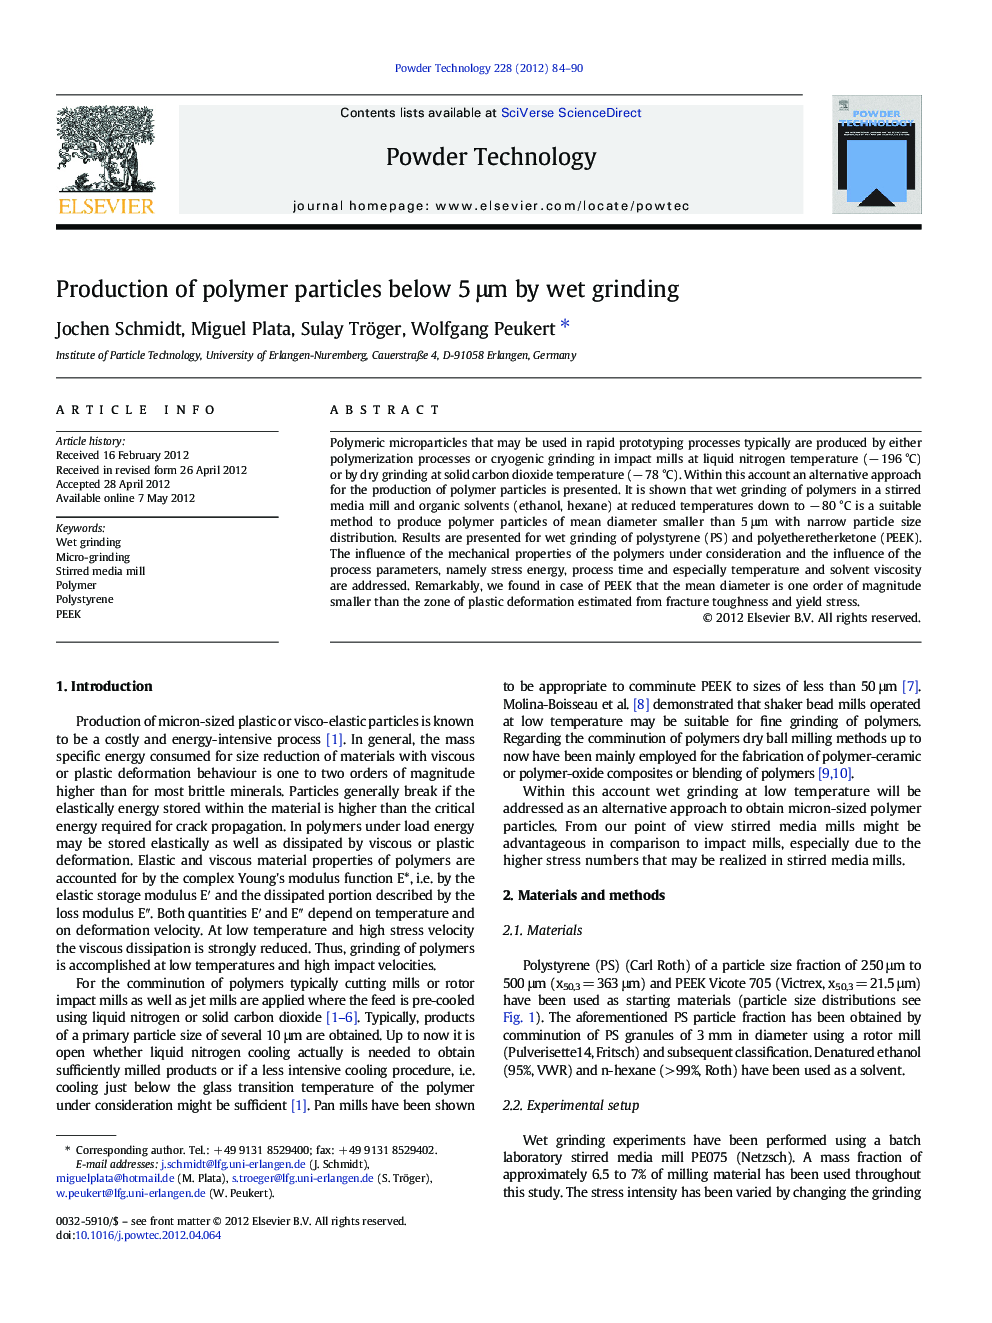 Production of polymer particles below 5Â Î¼m by wet grinding